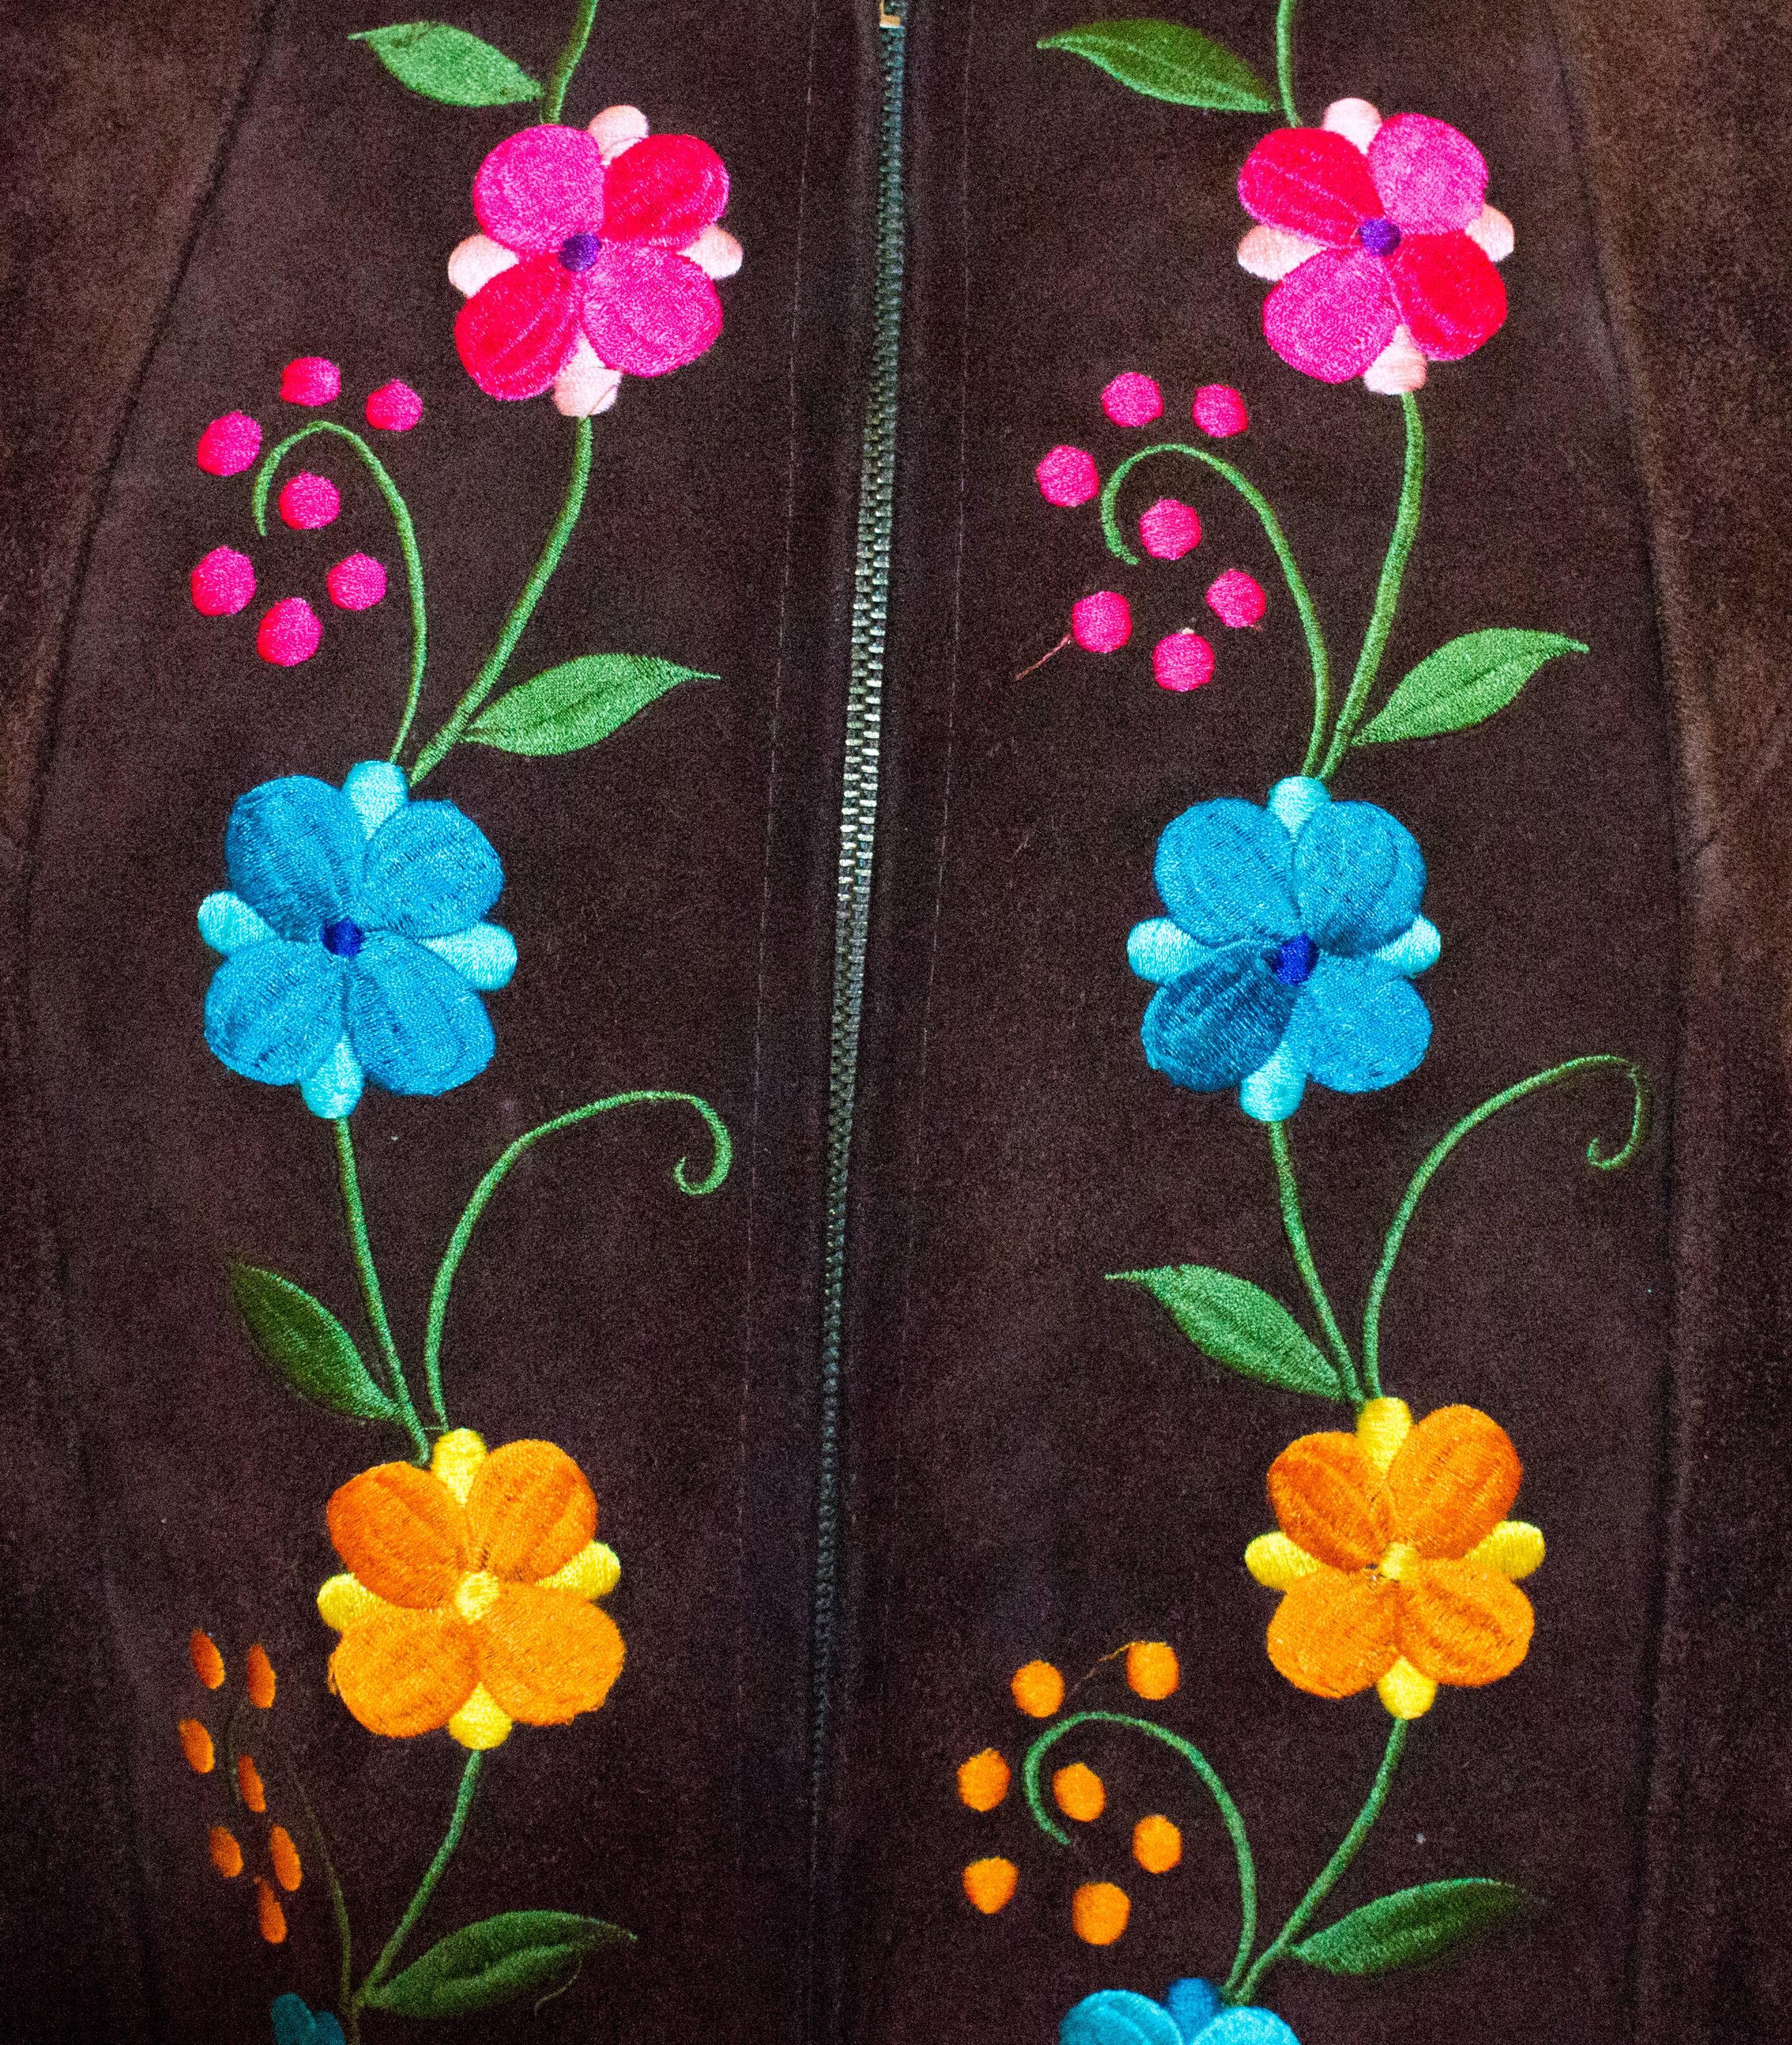 70s Suede Cape with Embroidered Flowers. Metal zipper up the front. 

